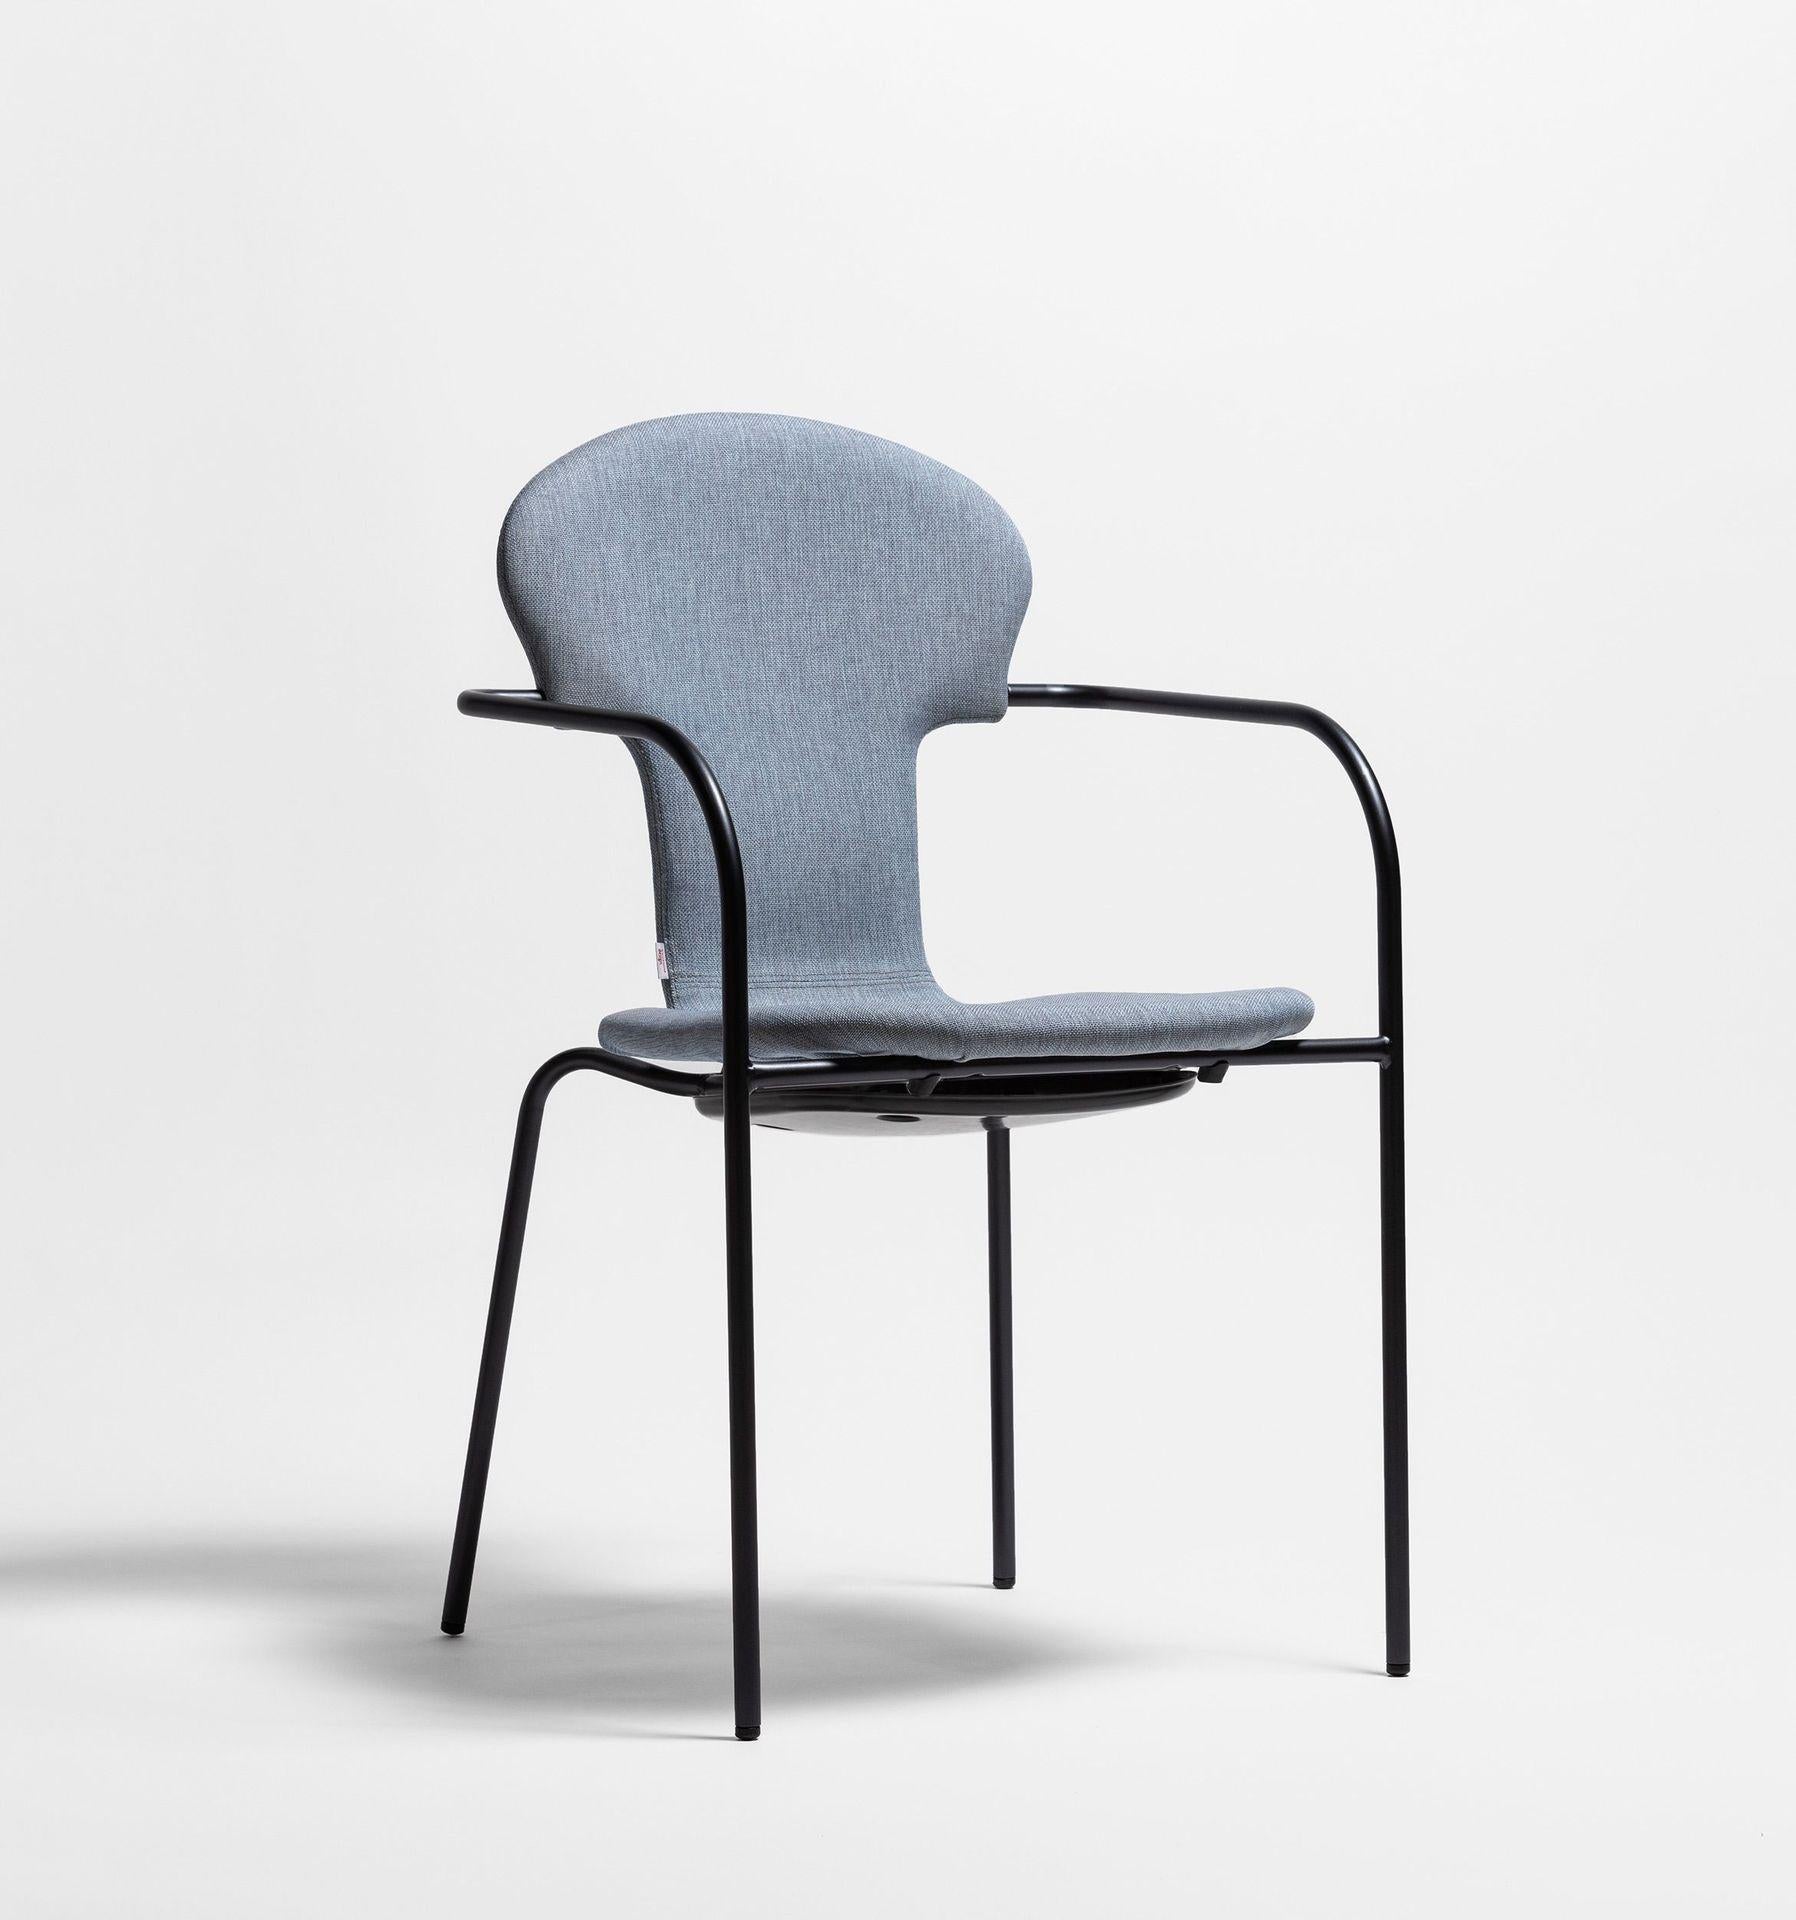 Minivarius blue chair by Oscar Tusquets
Dimensions: D 53 x W 52 x H 82 cm 
Materials: Structure in tubular steel painted in anodic black. A one-piece seat in gas injected polypropylene in black or white. Also available in an upholstered
version